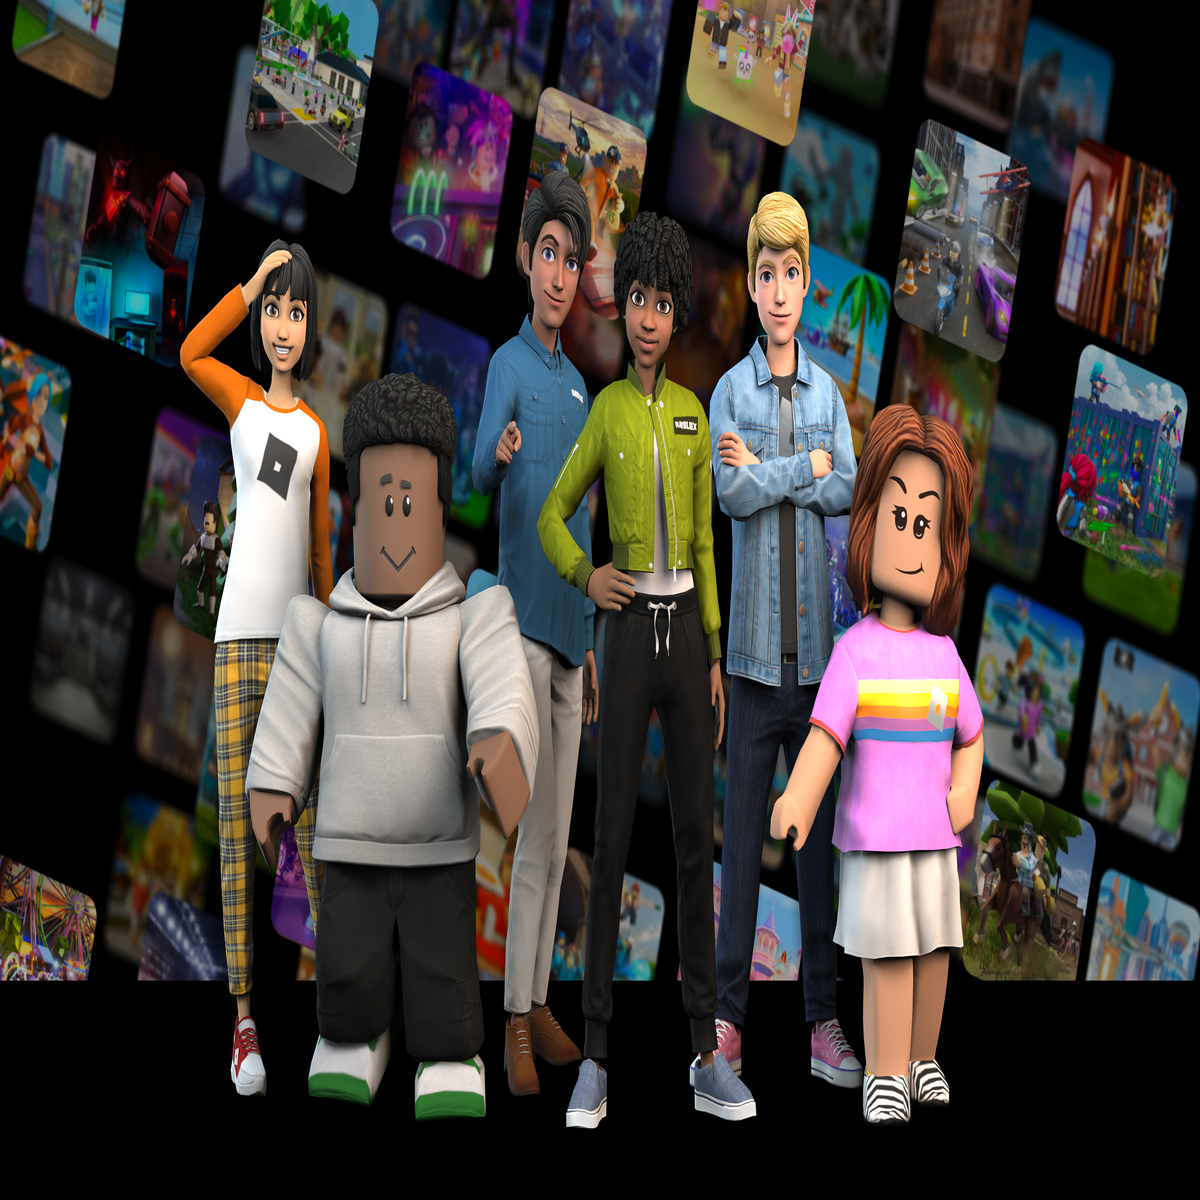 People Make Games is taking on Roblox and abusive indie